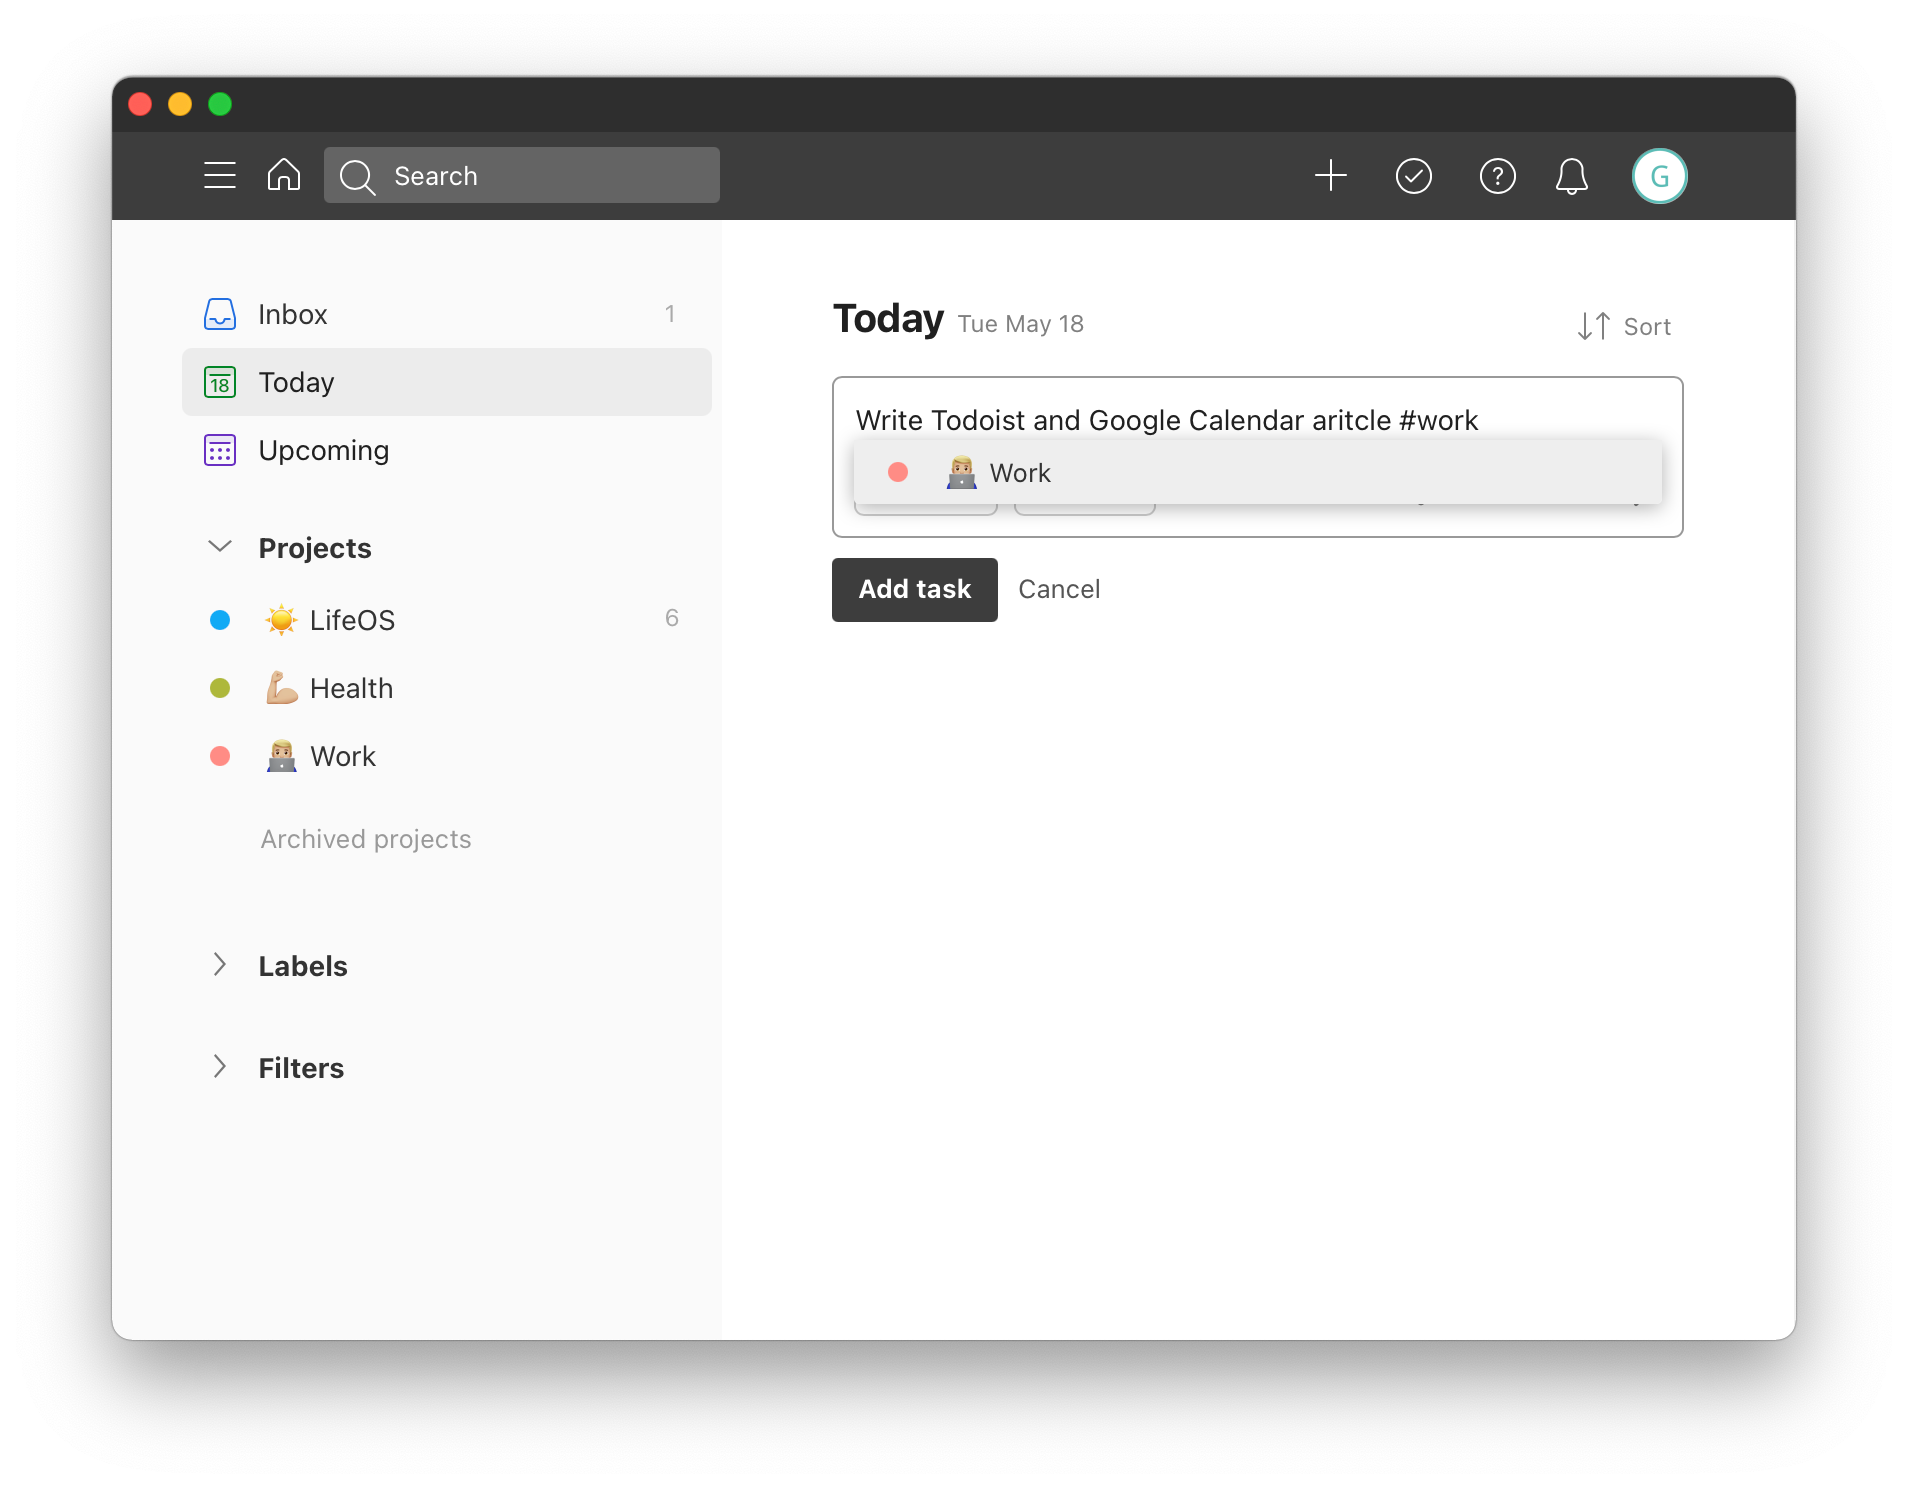 Creating a new task in Todoist with #work